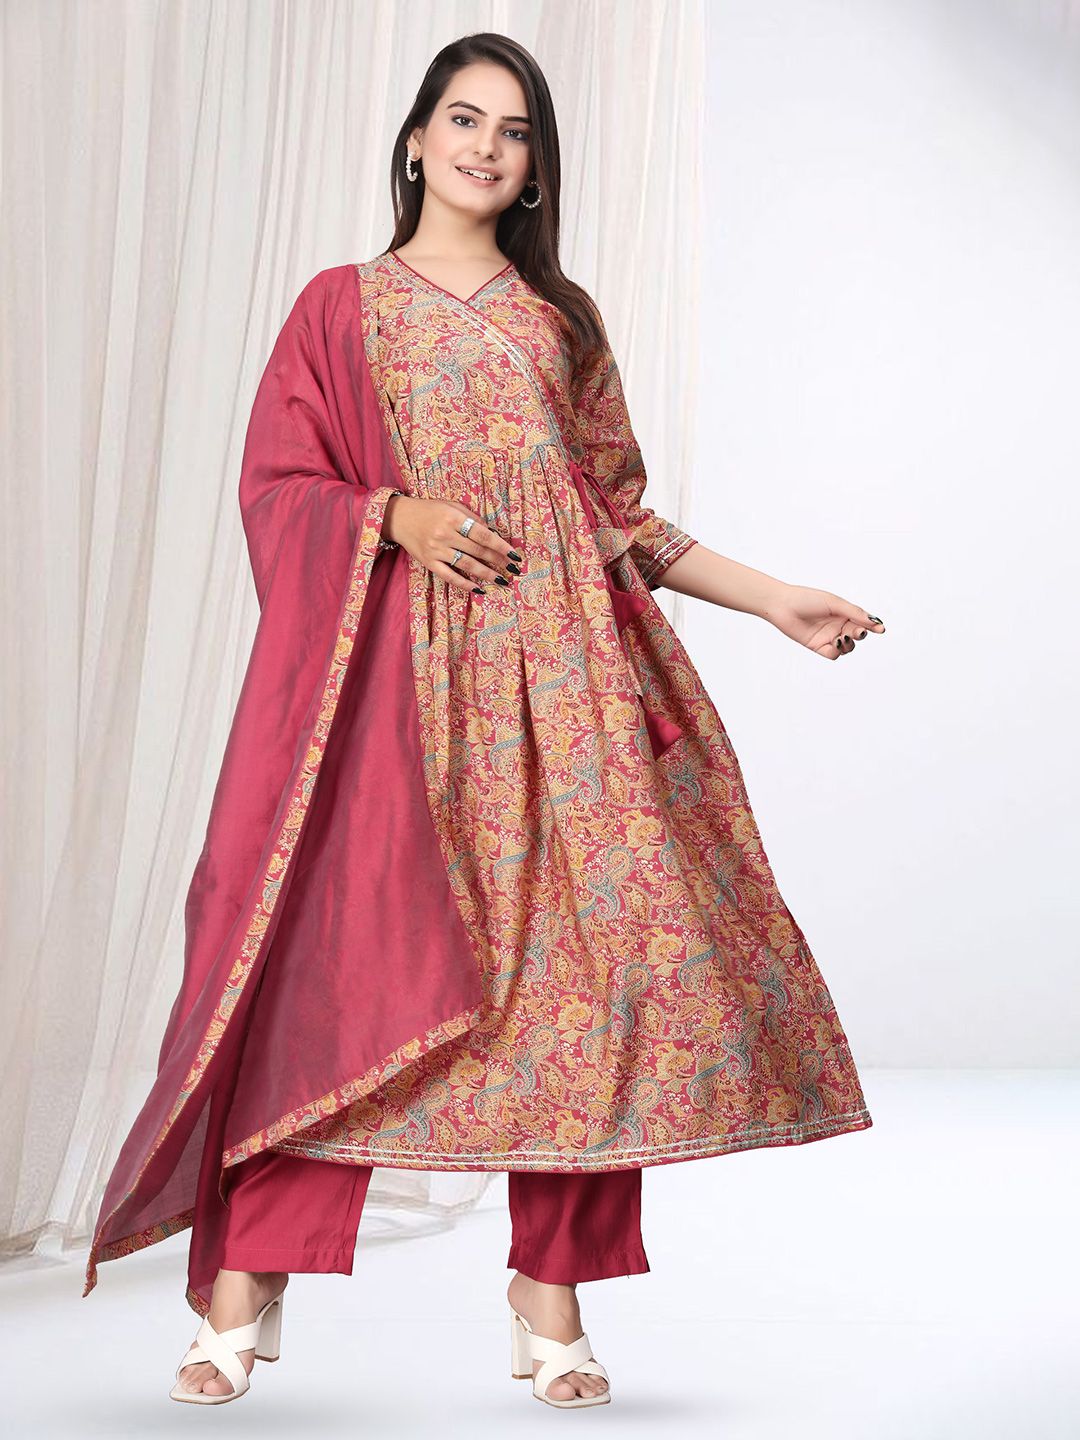 rashora Red Georgette A-Line Dress Price in India